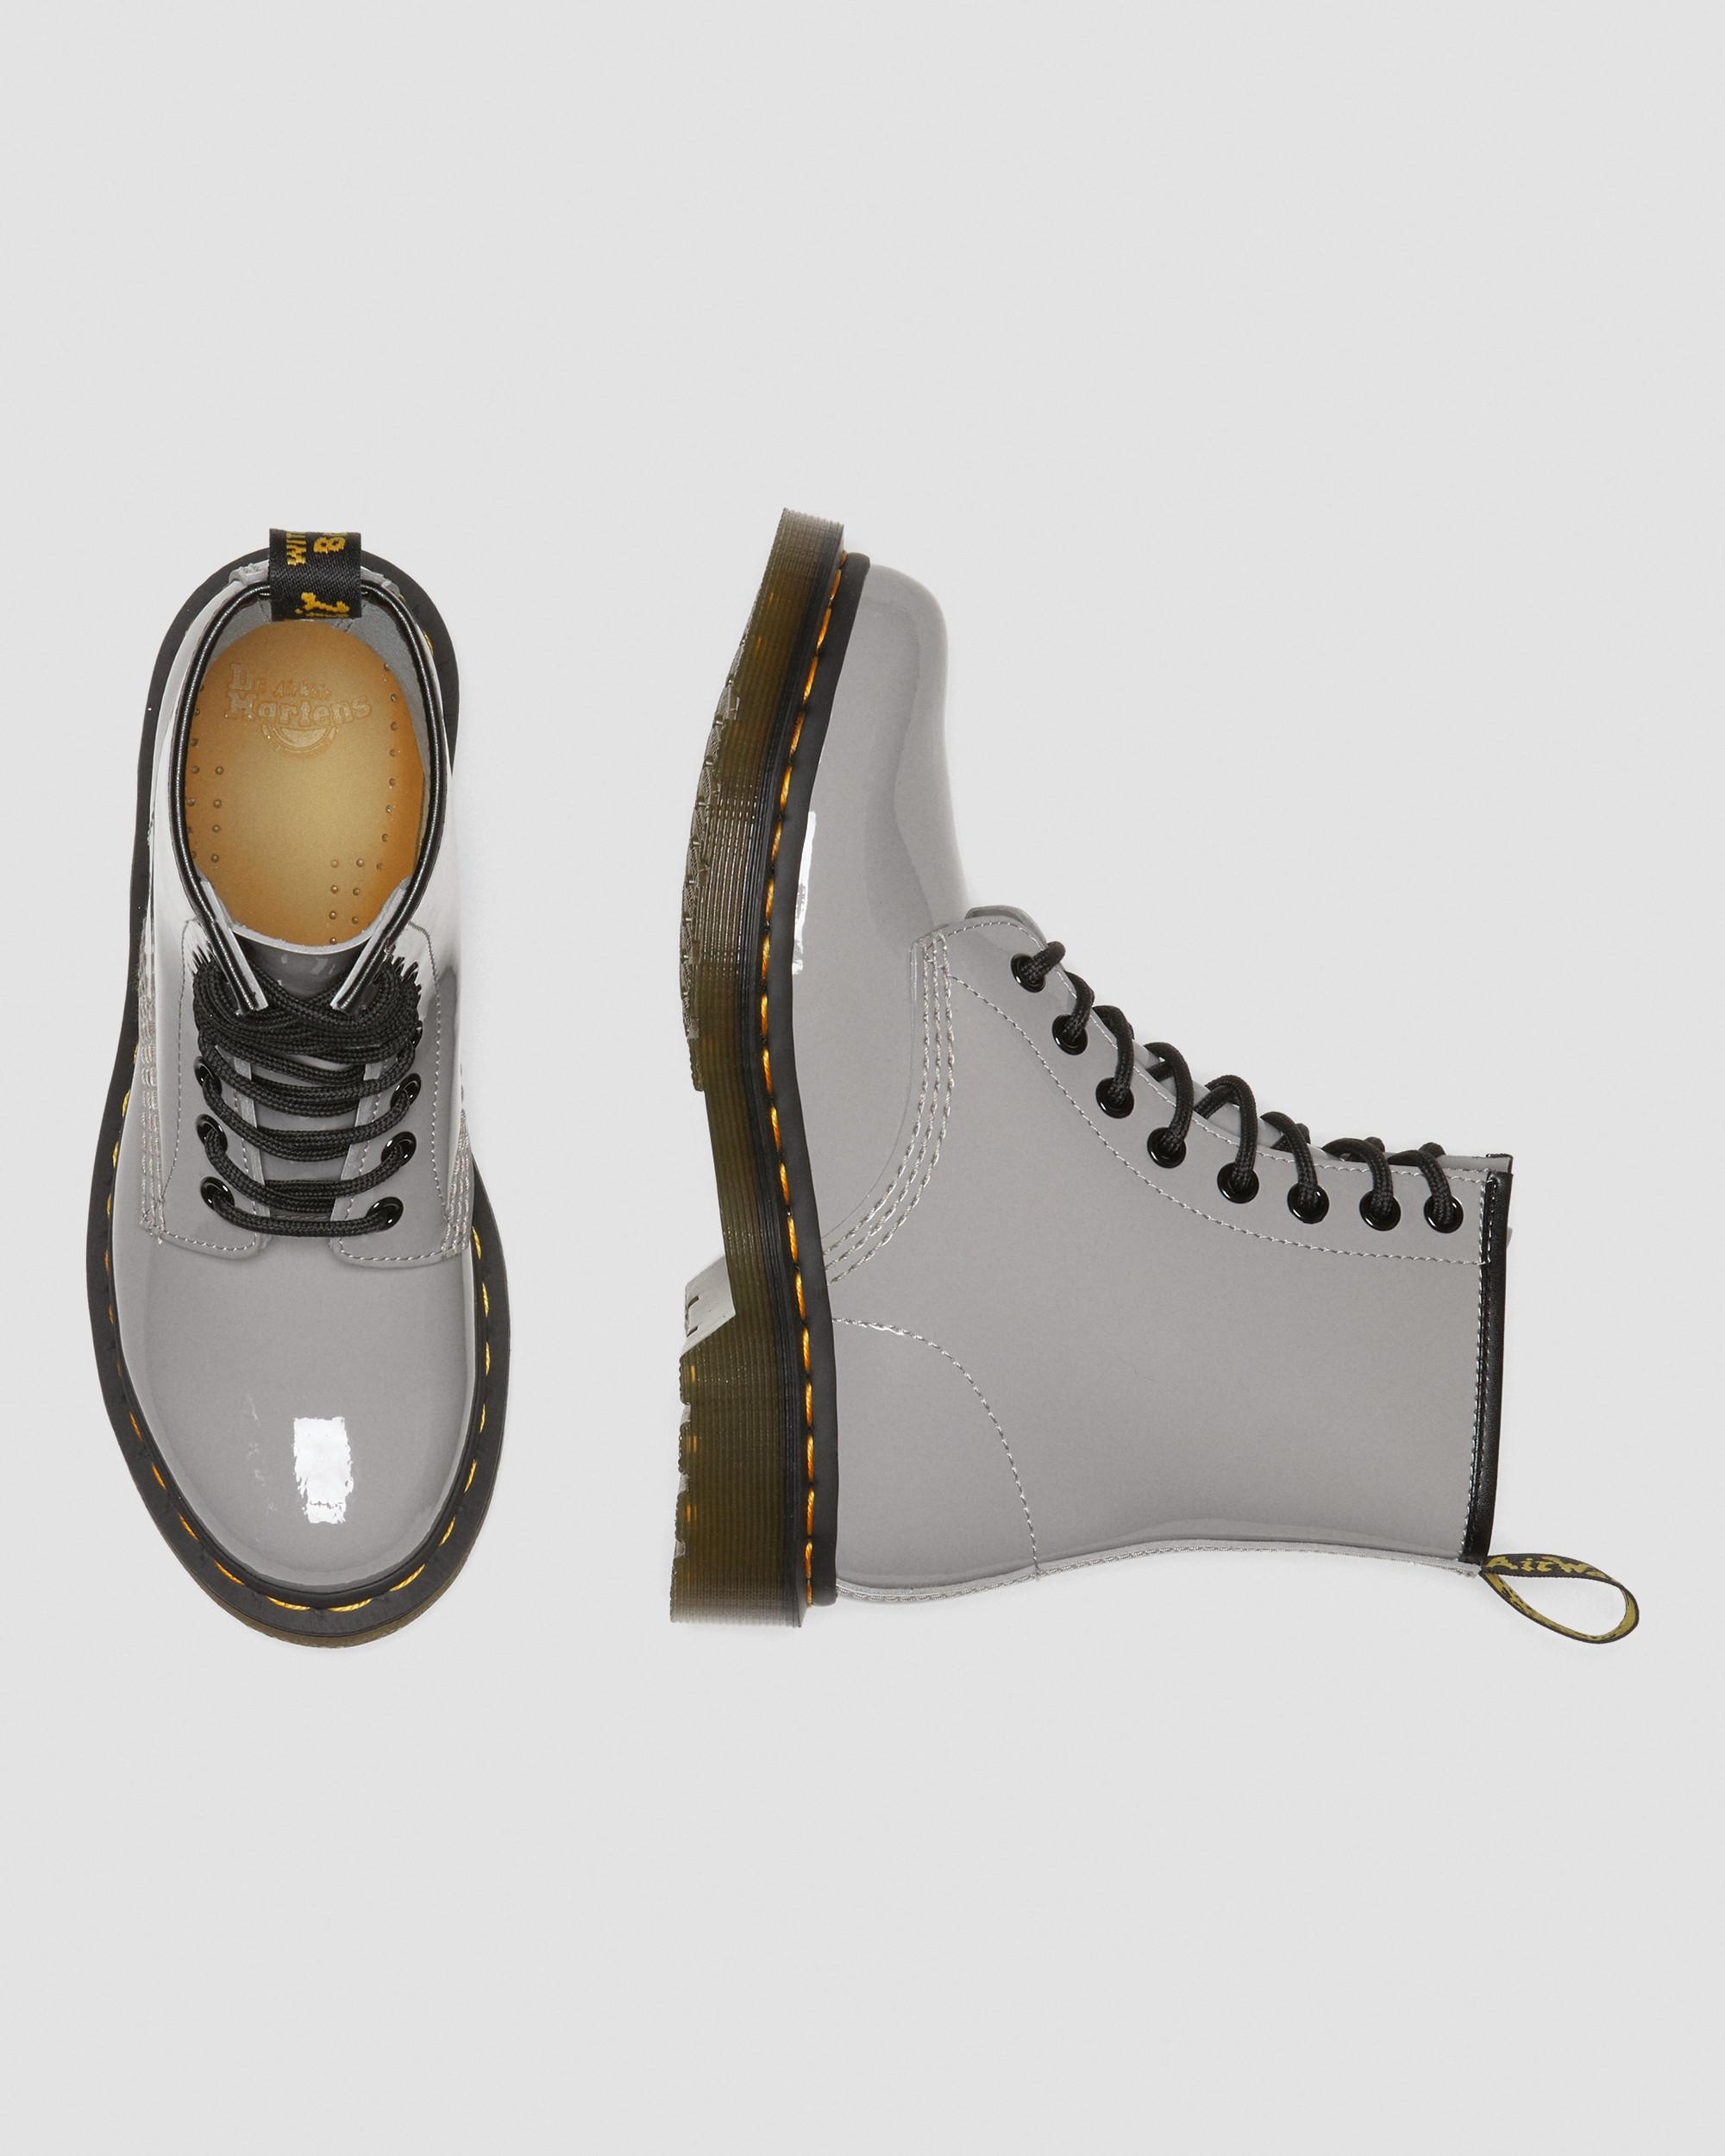 Womens Dr. Martens 1460 8-Eye Patent Boot - White